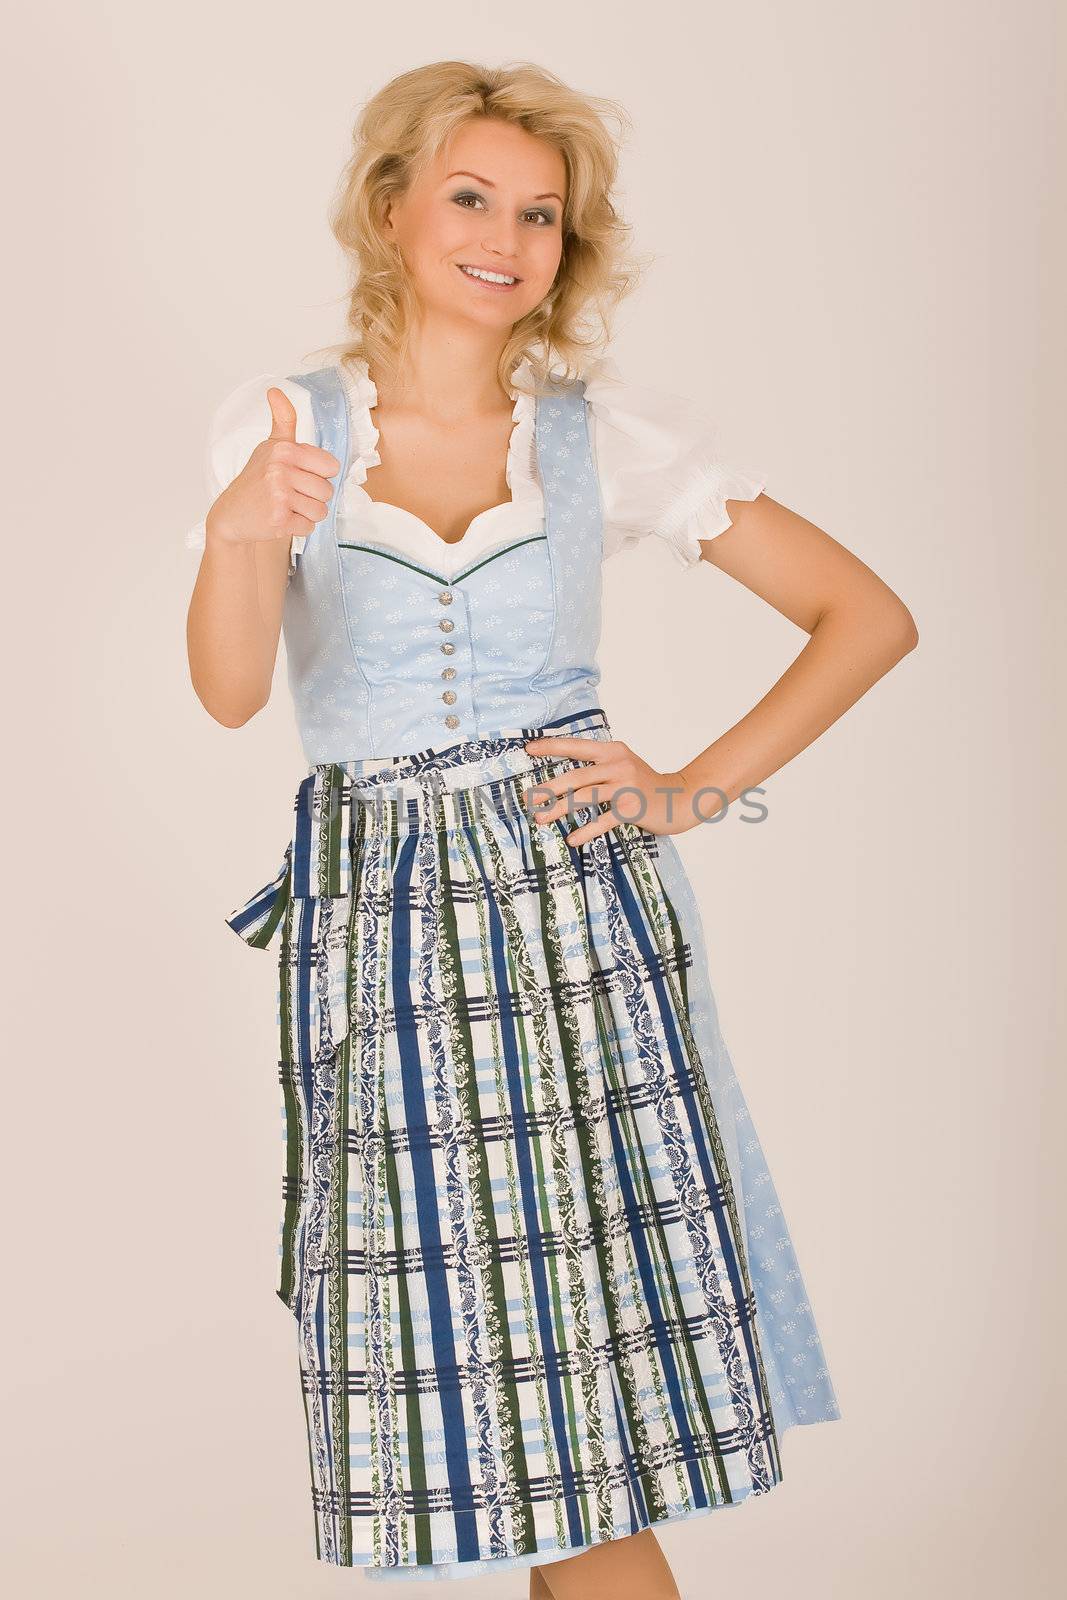 Bavarian beauty in costume by STphotography